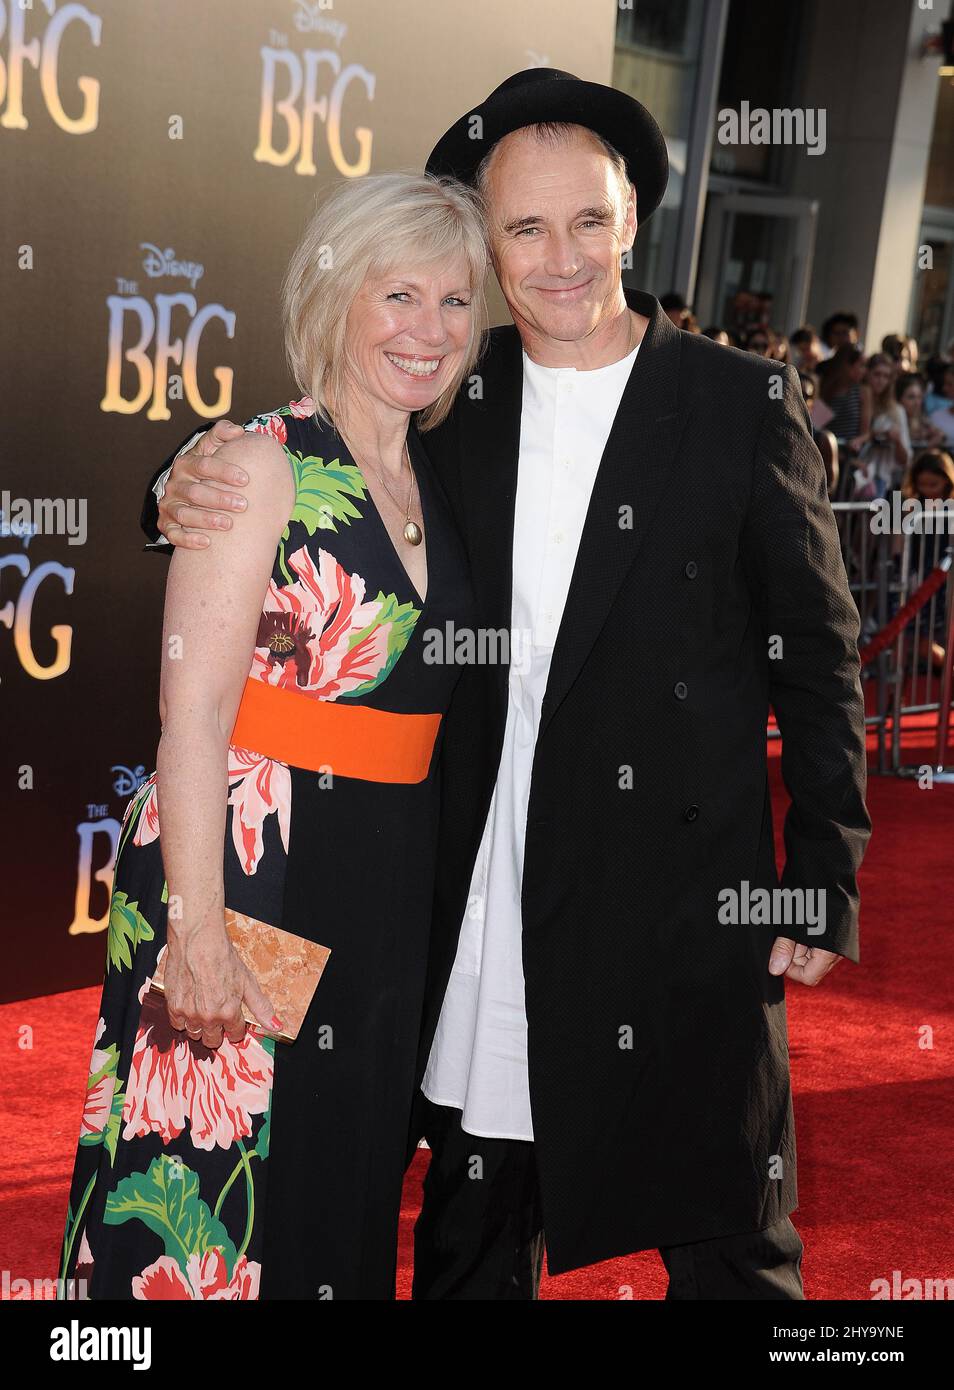 Mark Rylance, Claire van Kampen attending the premiere of 'The BFG' in Los Angeles. Stock Photo